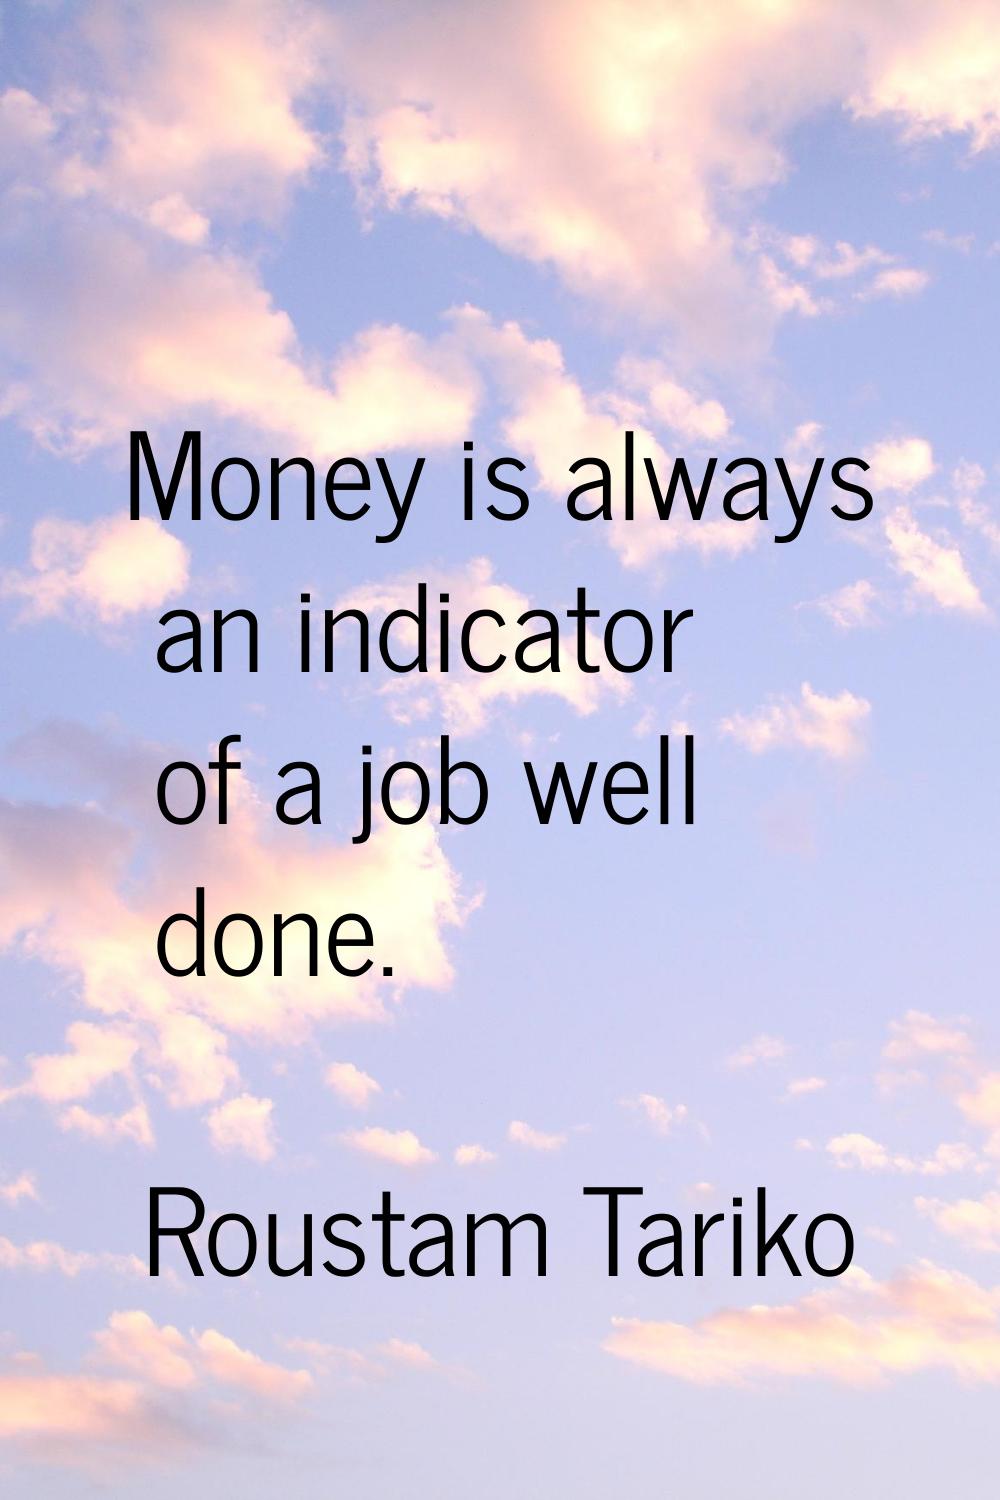 Money is always an indicator of a job well done.